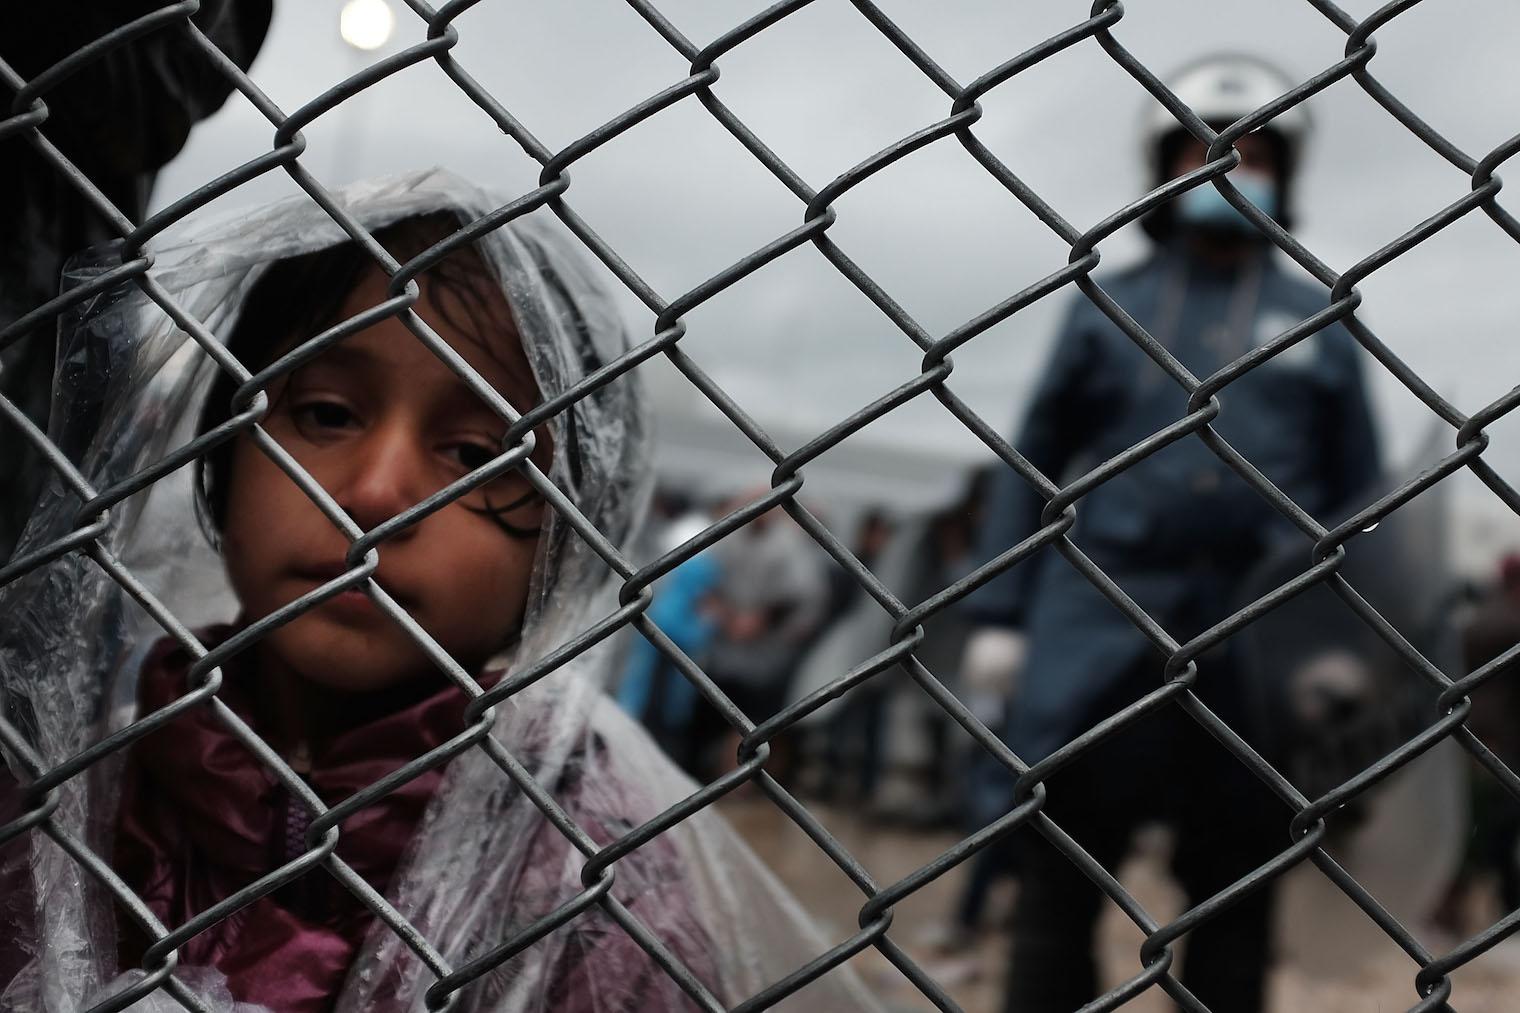 A child waits with her father at the migrant processing center at the increasingly overwhelmed Moria camp on the island of Lesbos  (Picture: Getty)